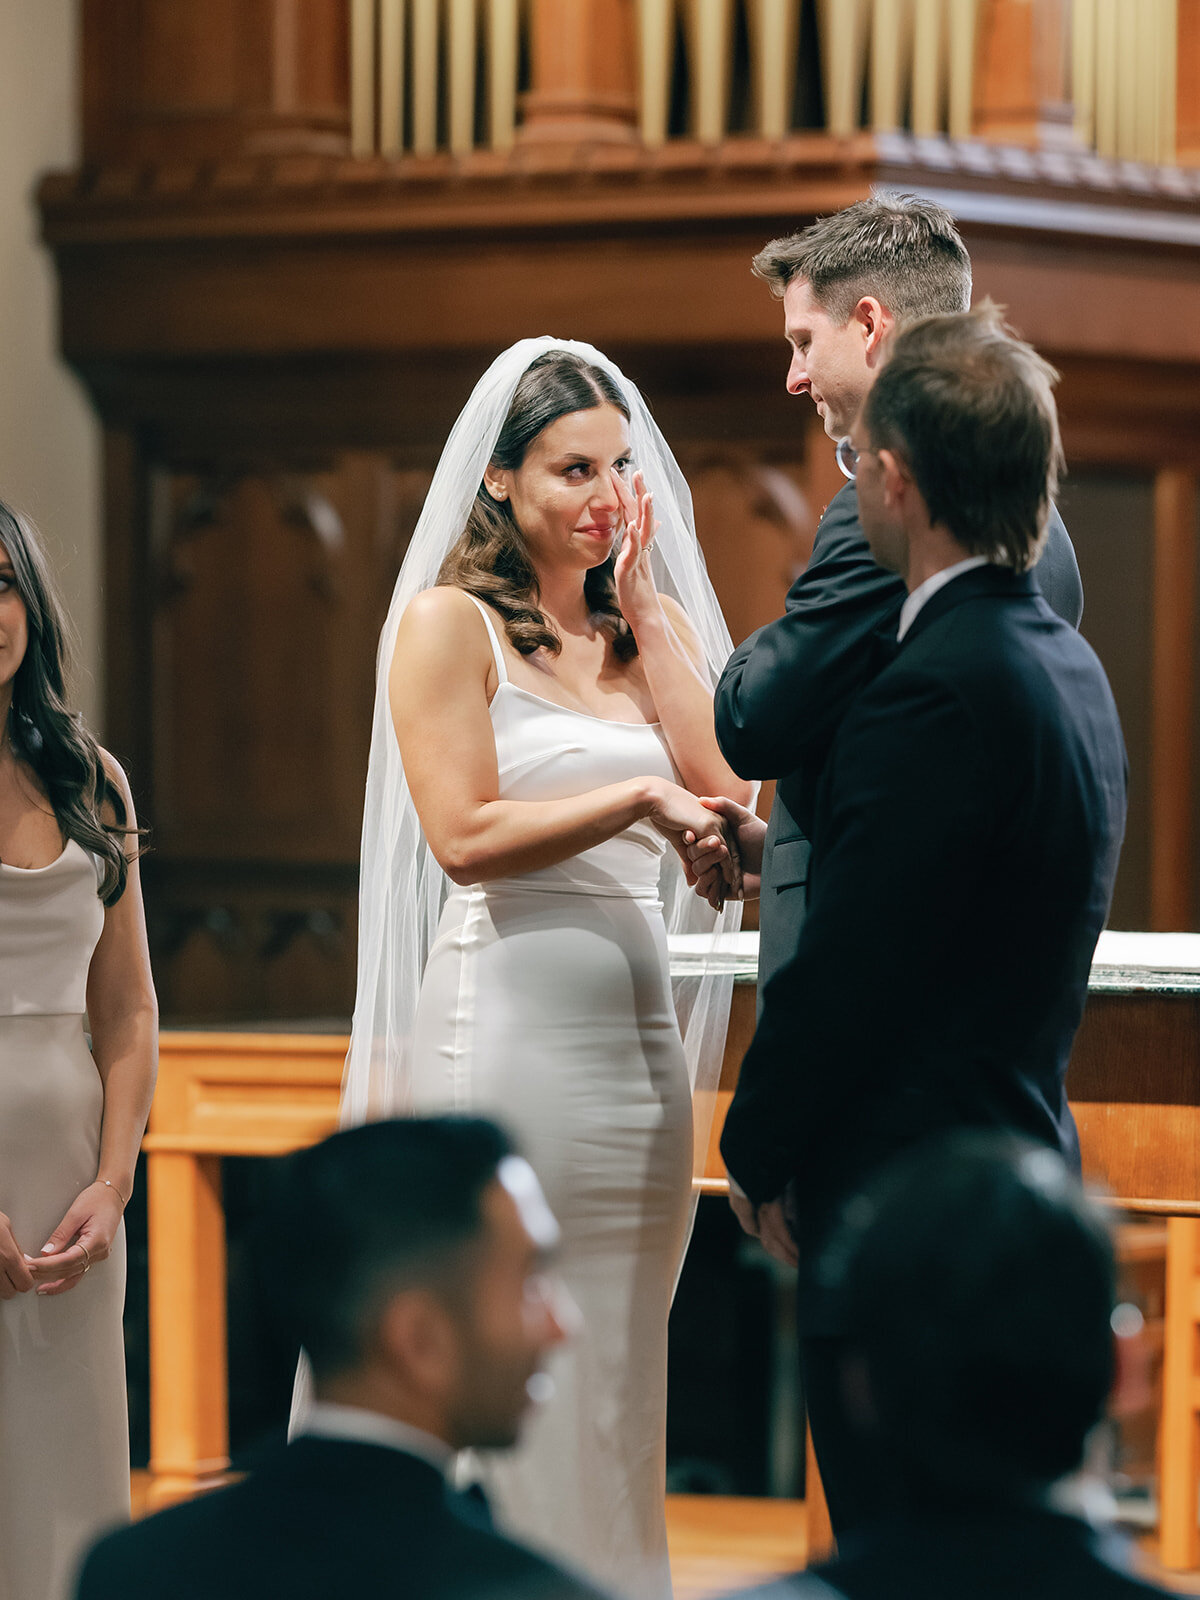 Bride sheds tears as they exchange vows at Dahlgren Chapel